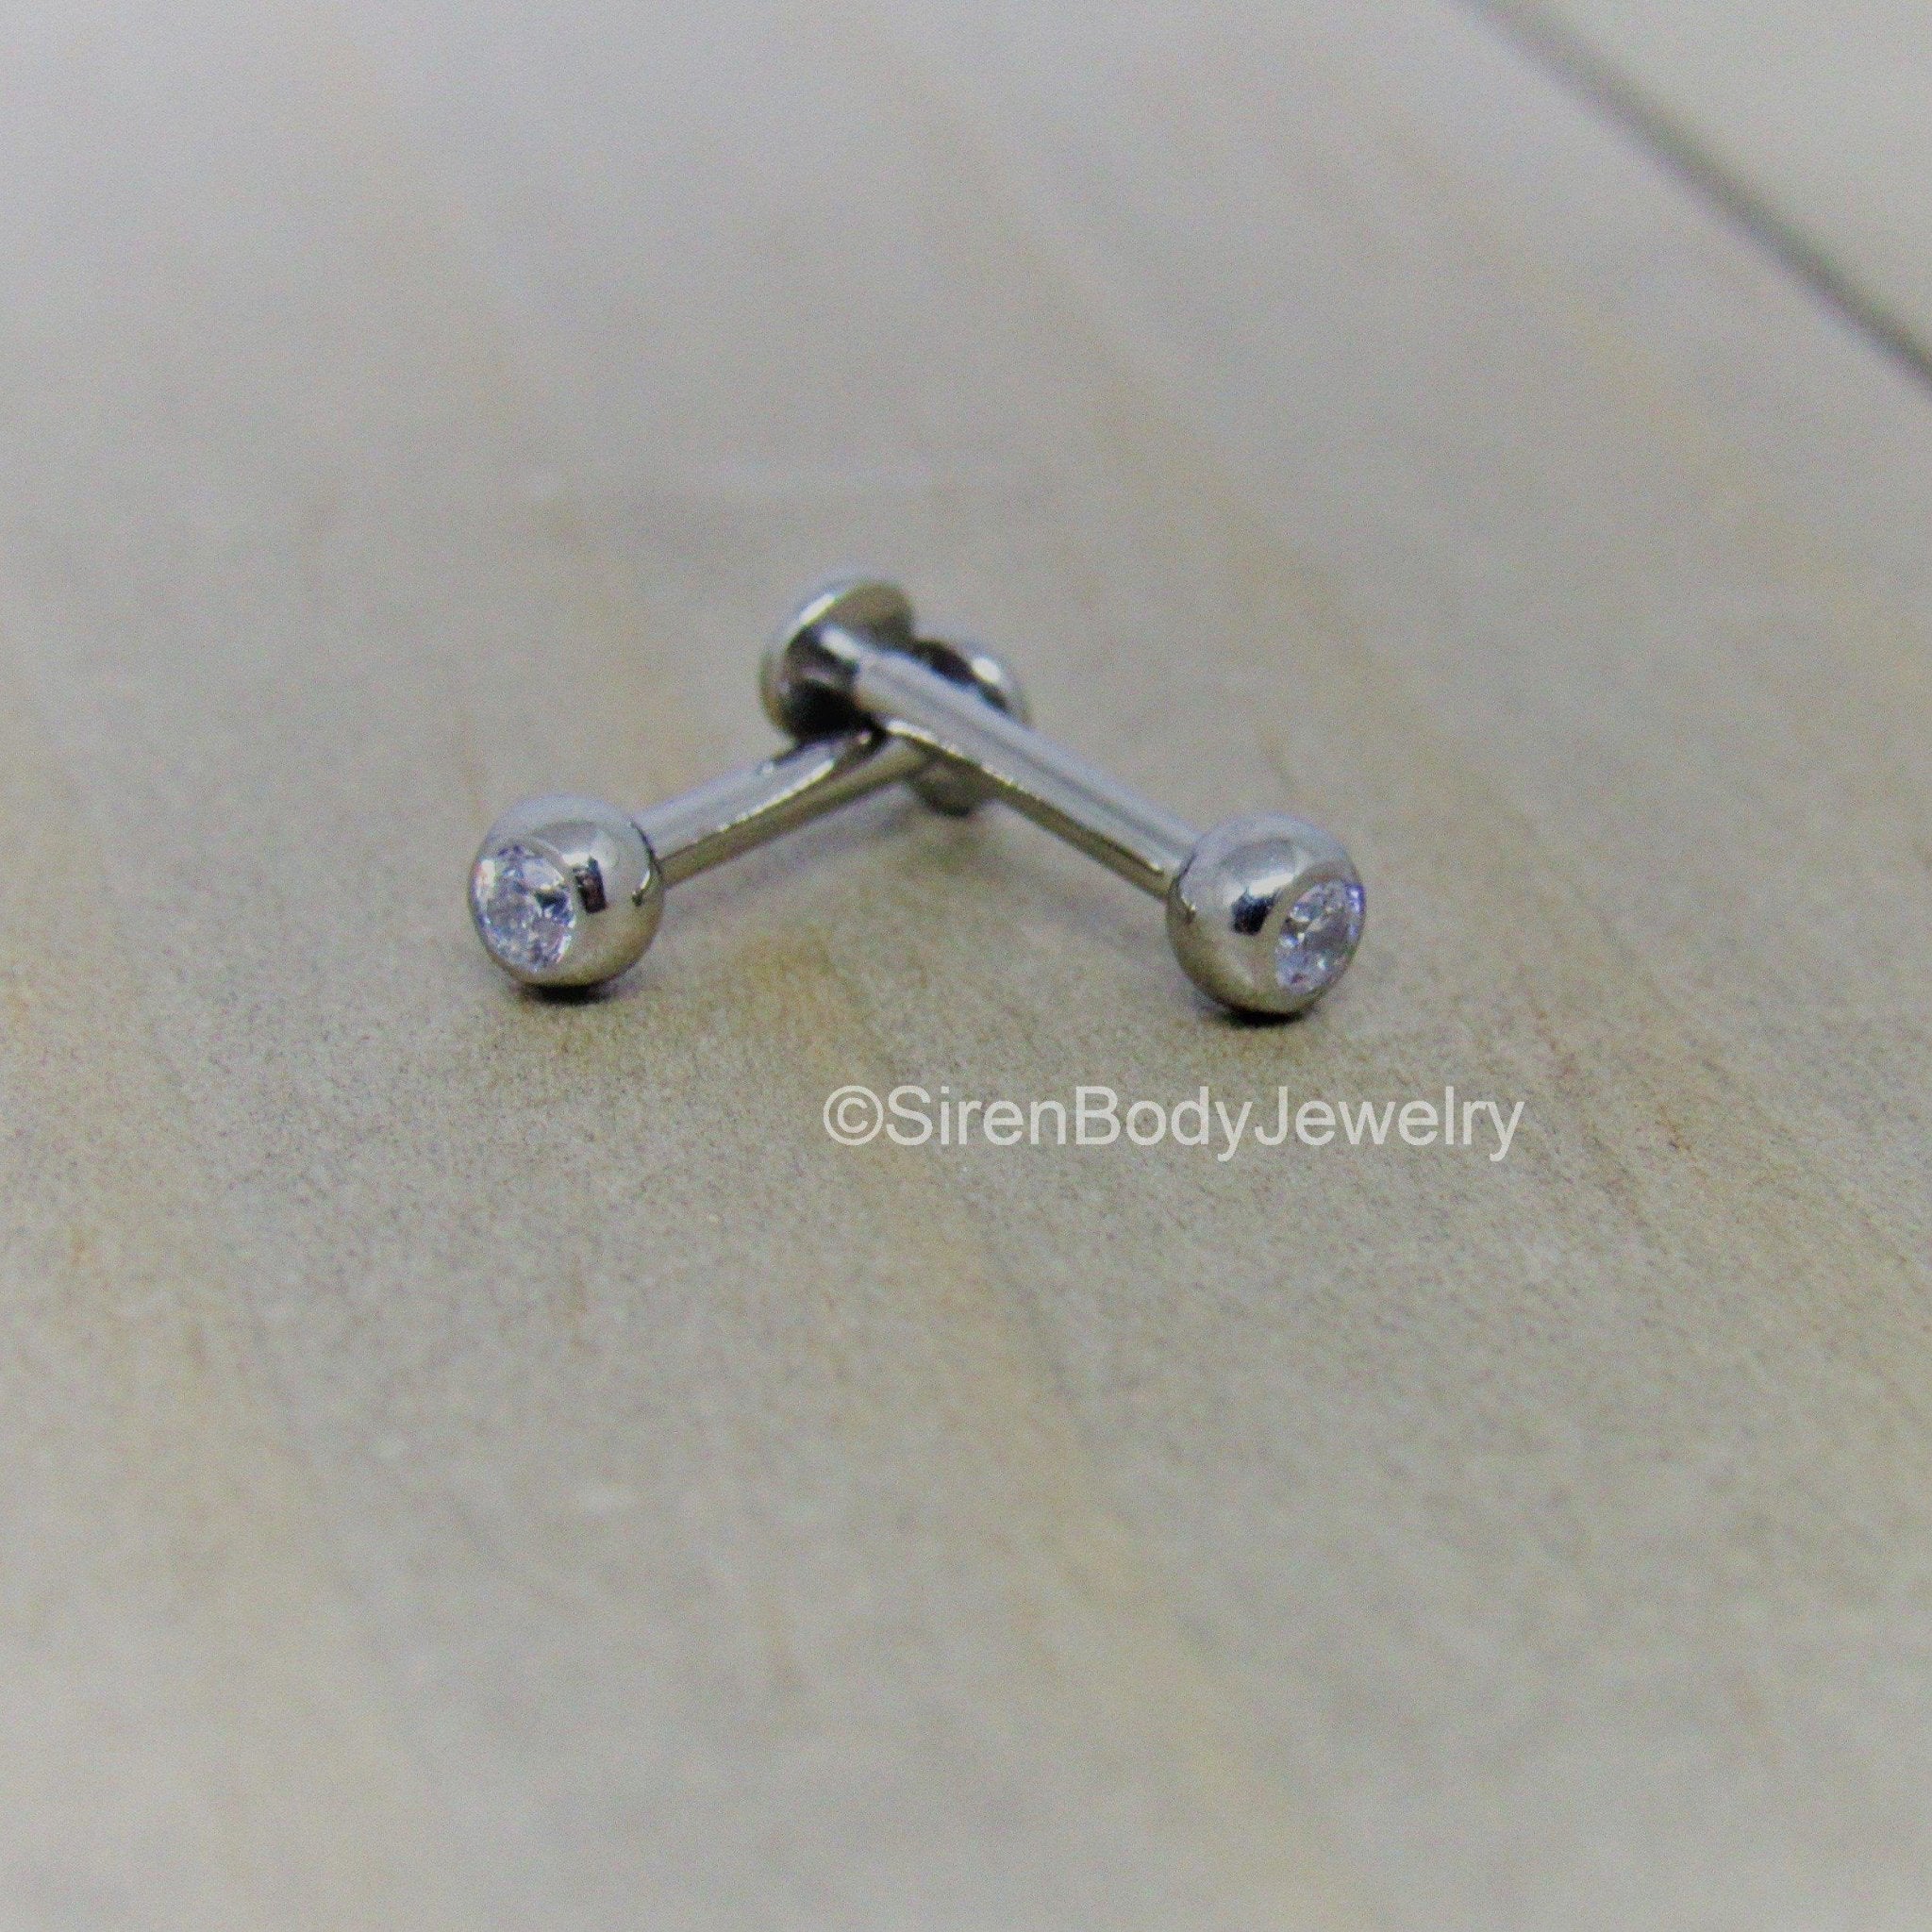 KIKICHIC | Minimalist Jewelry | NYC | Ball Screw Flat Back Tiny CZ Lighting  Bolt Stud Earrings Cartilage, Tragus, Helix, Conch in Sterling Silver in  14k Gold and Silver.